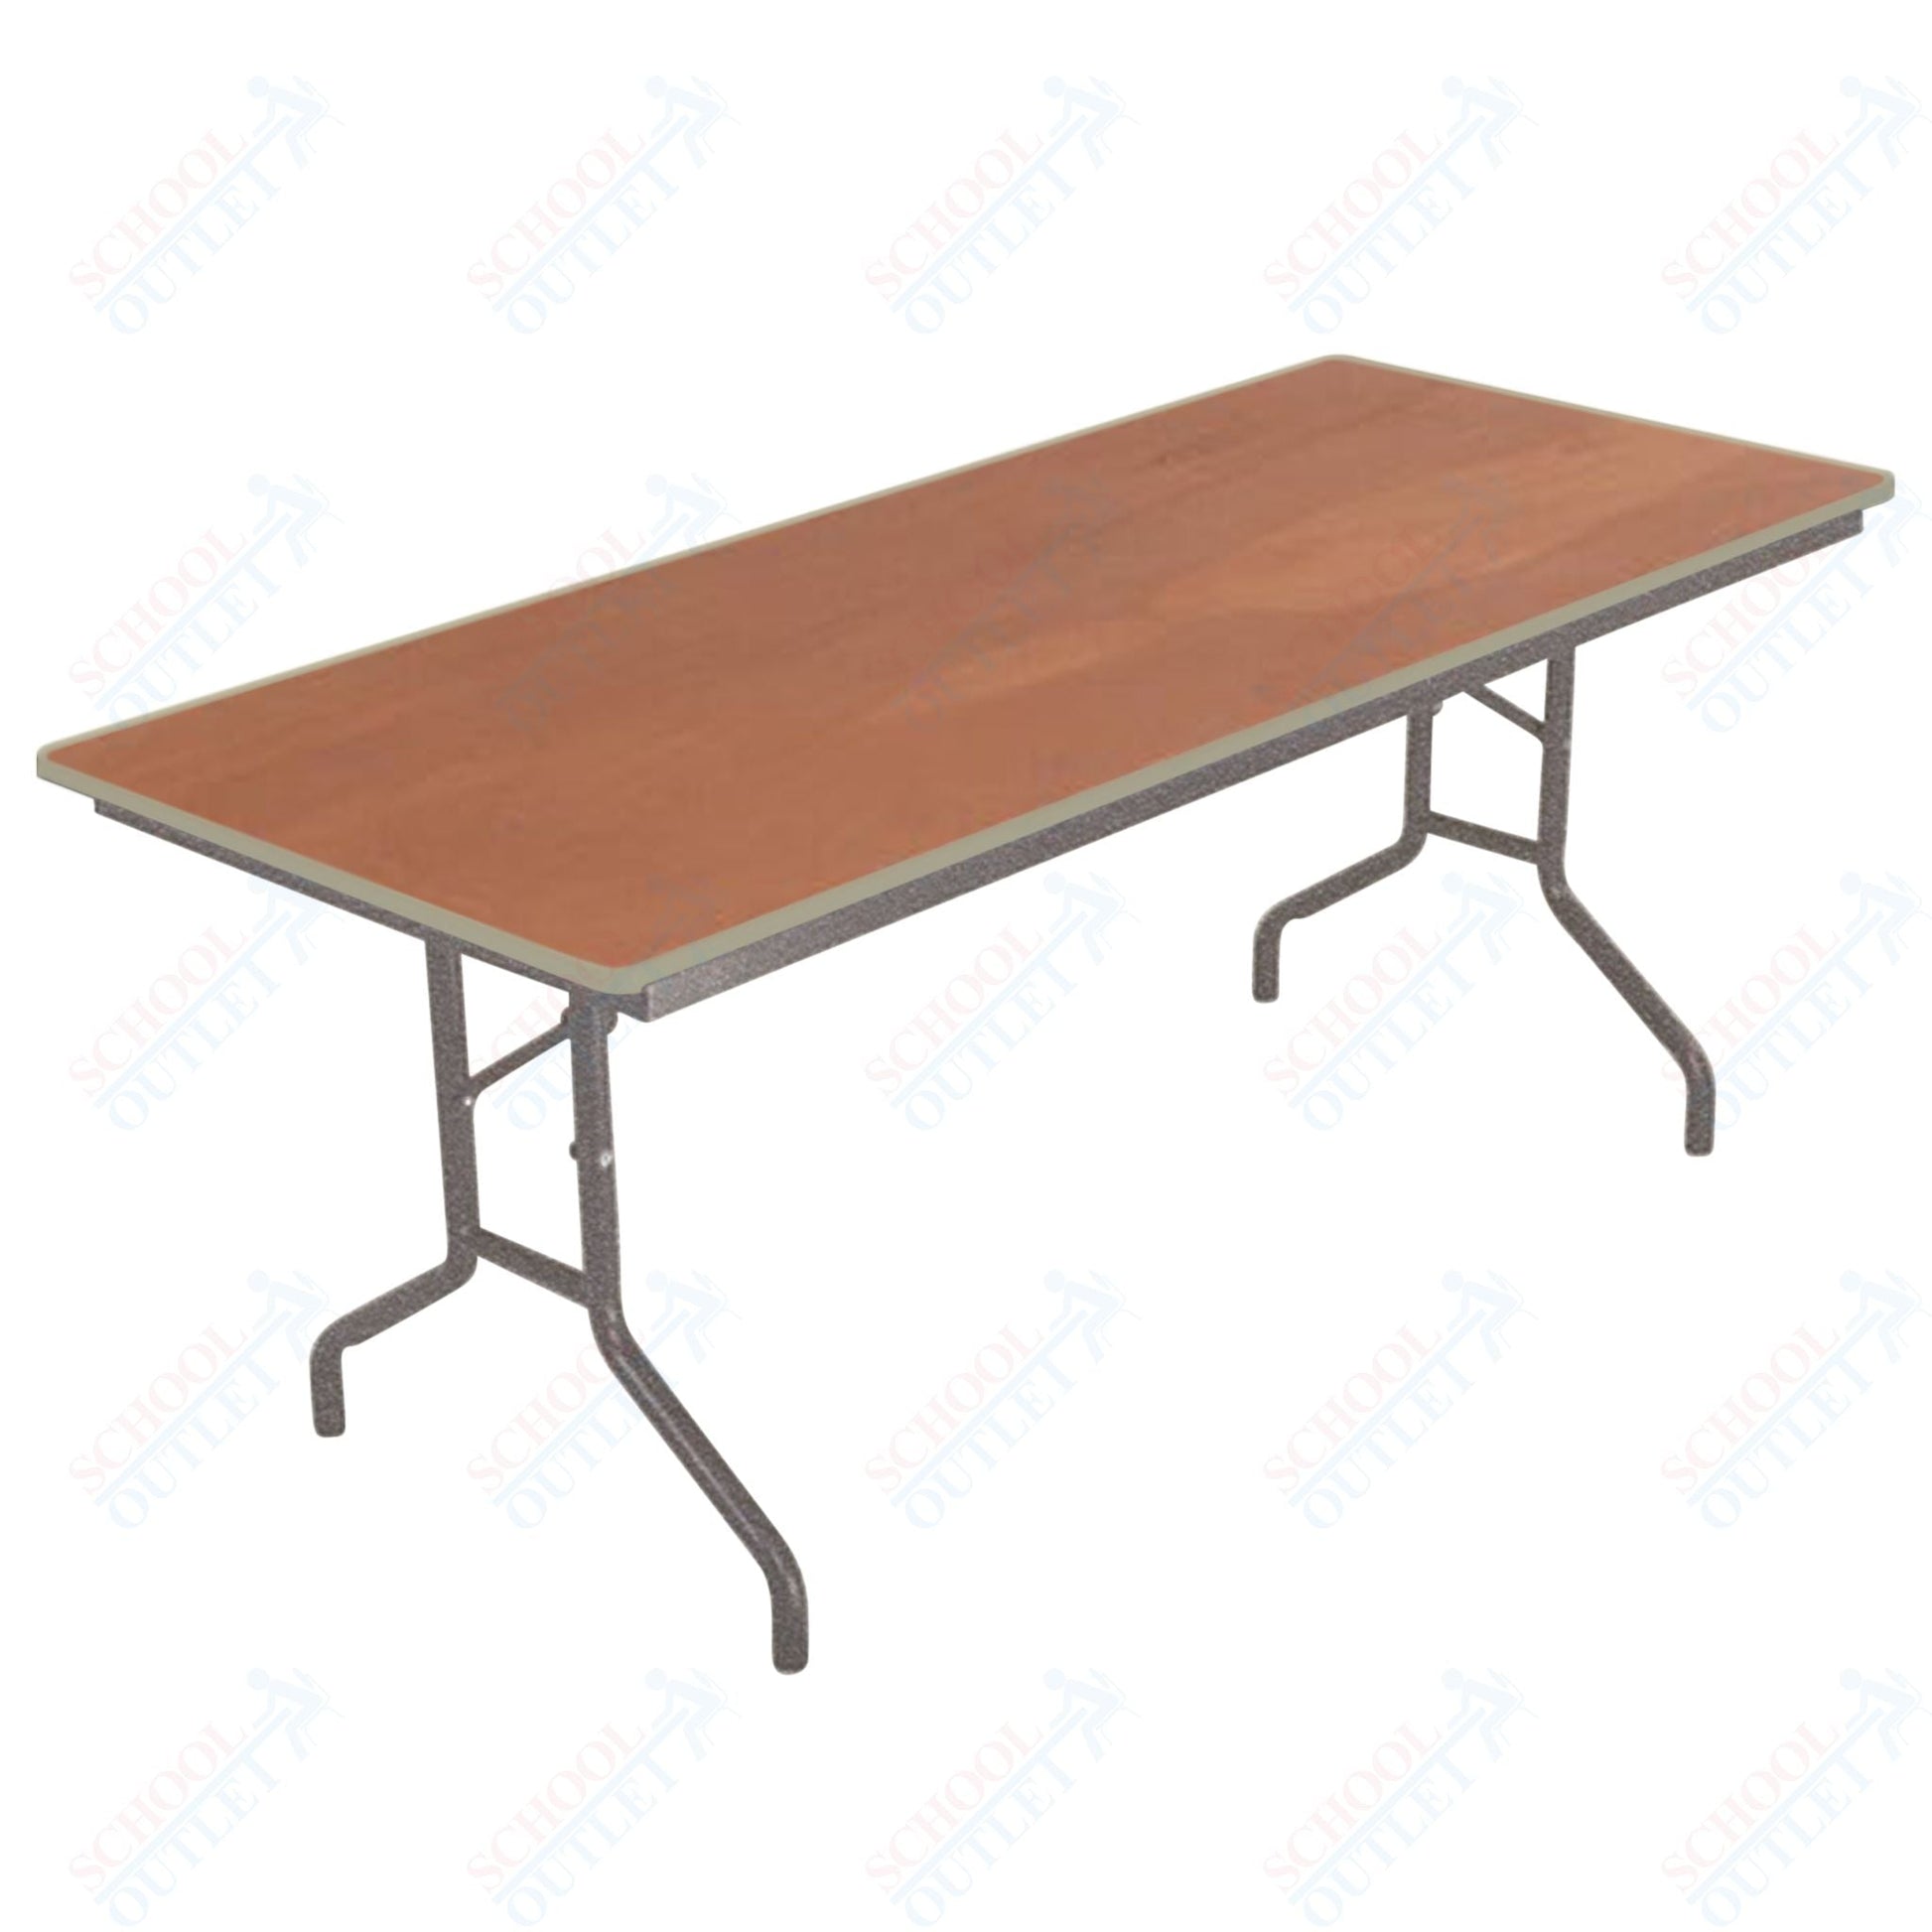 AmTab Folding Table - Plywood Stained and Sealed - Vinyl T - Molding Edge - 24"W x 60"L x 29"H (AmTab AMT - 245PM) - SchoolOutlet